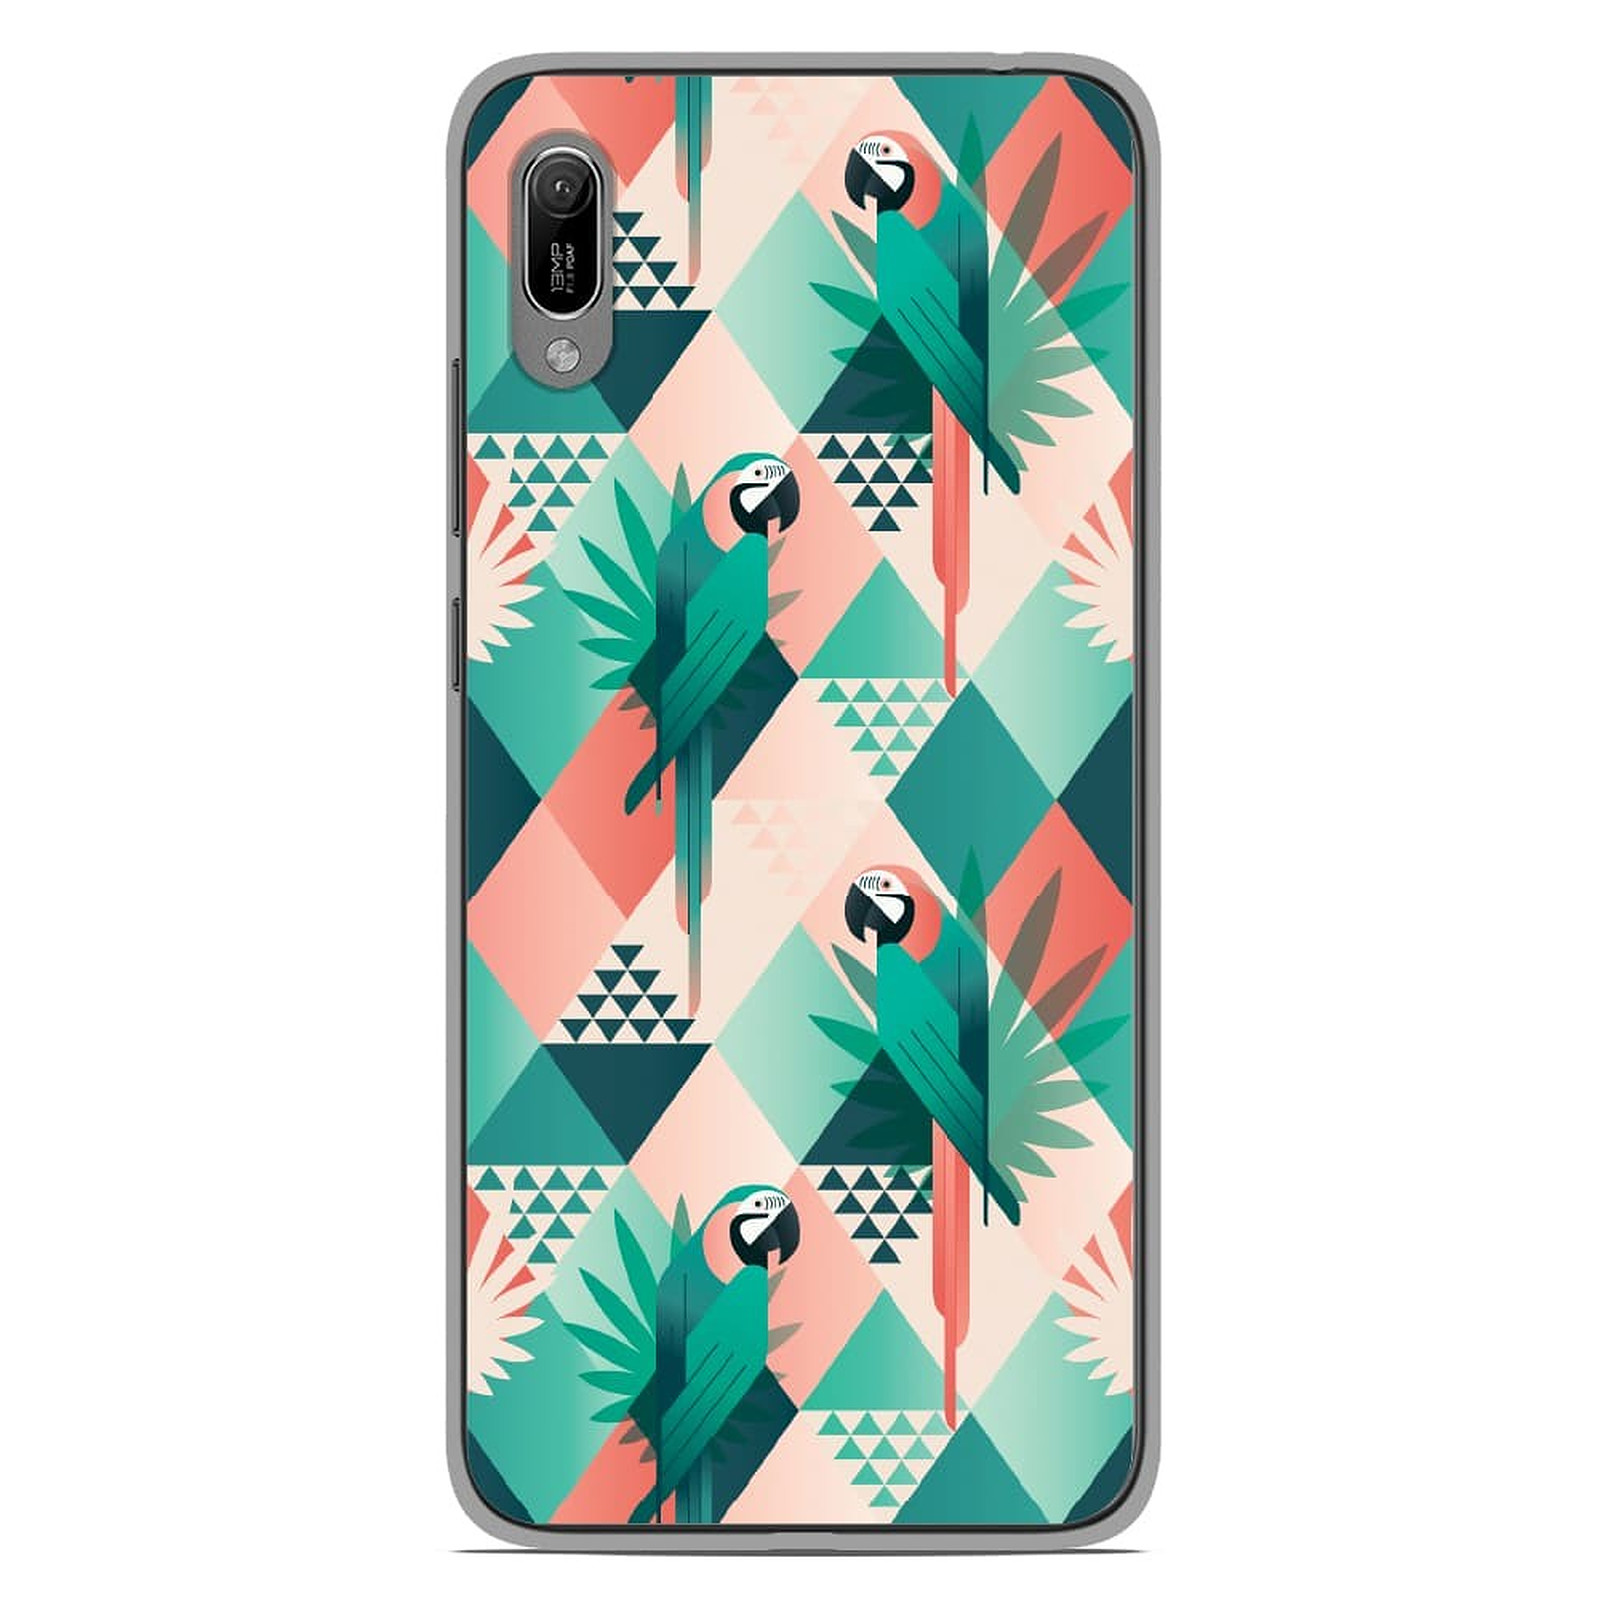 1001 Coques Coque silicone gel Huawei Y6 2019 motif Perroquet ge´ome´trique - Coque telephone 1001Coques